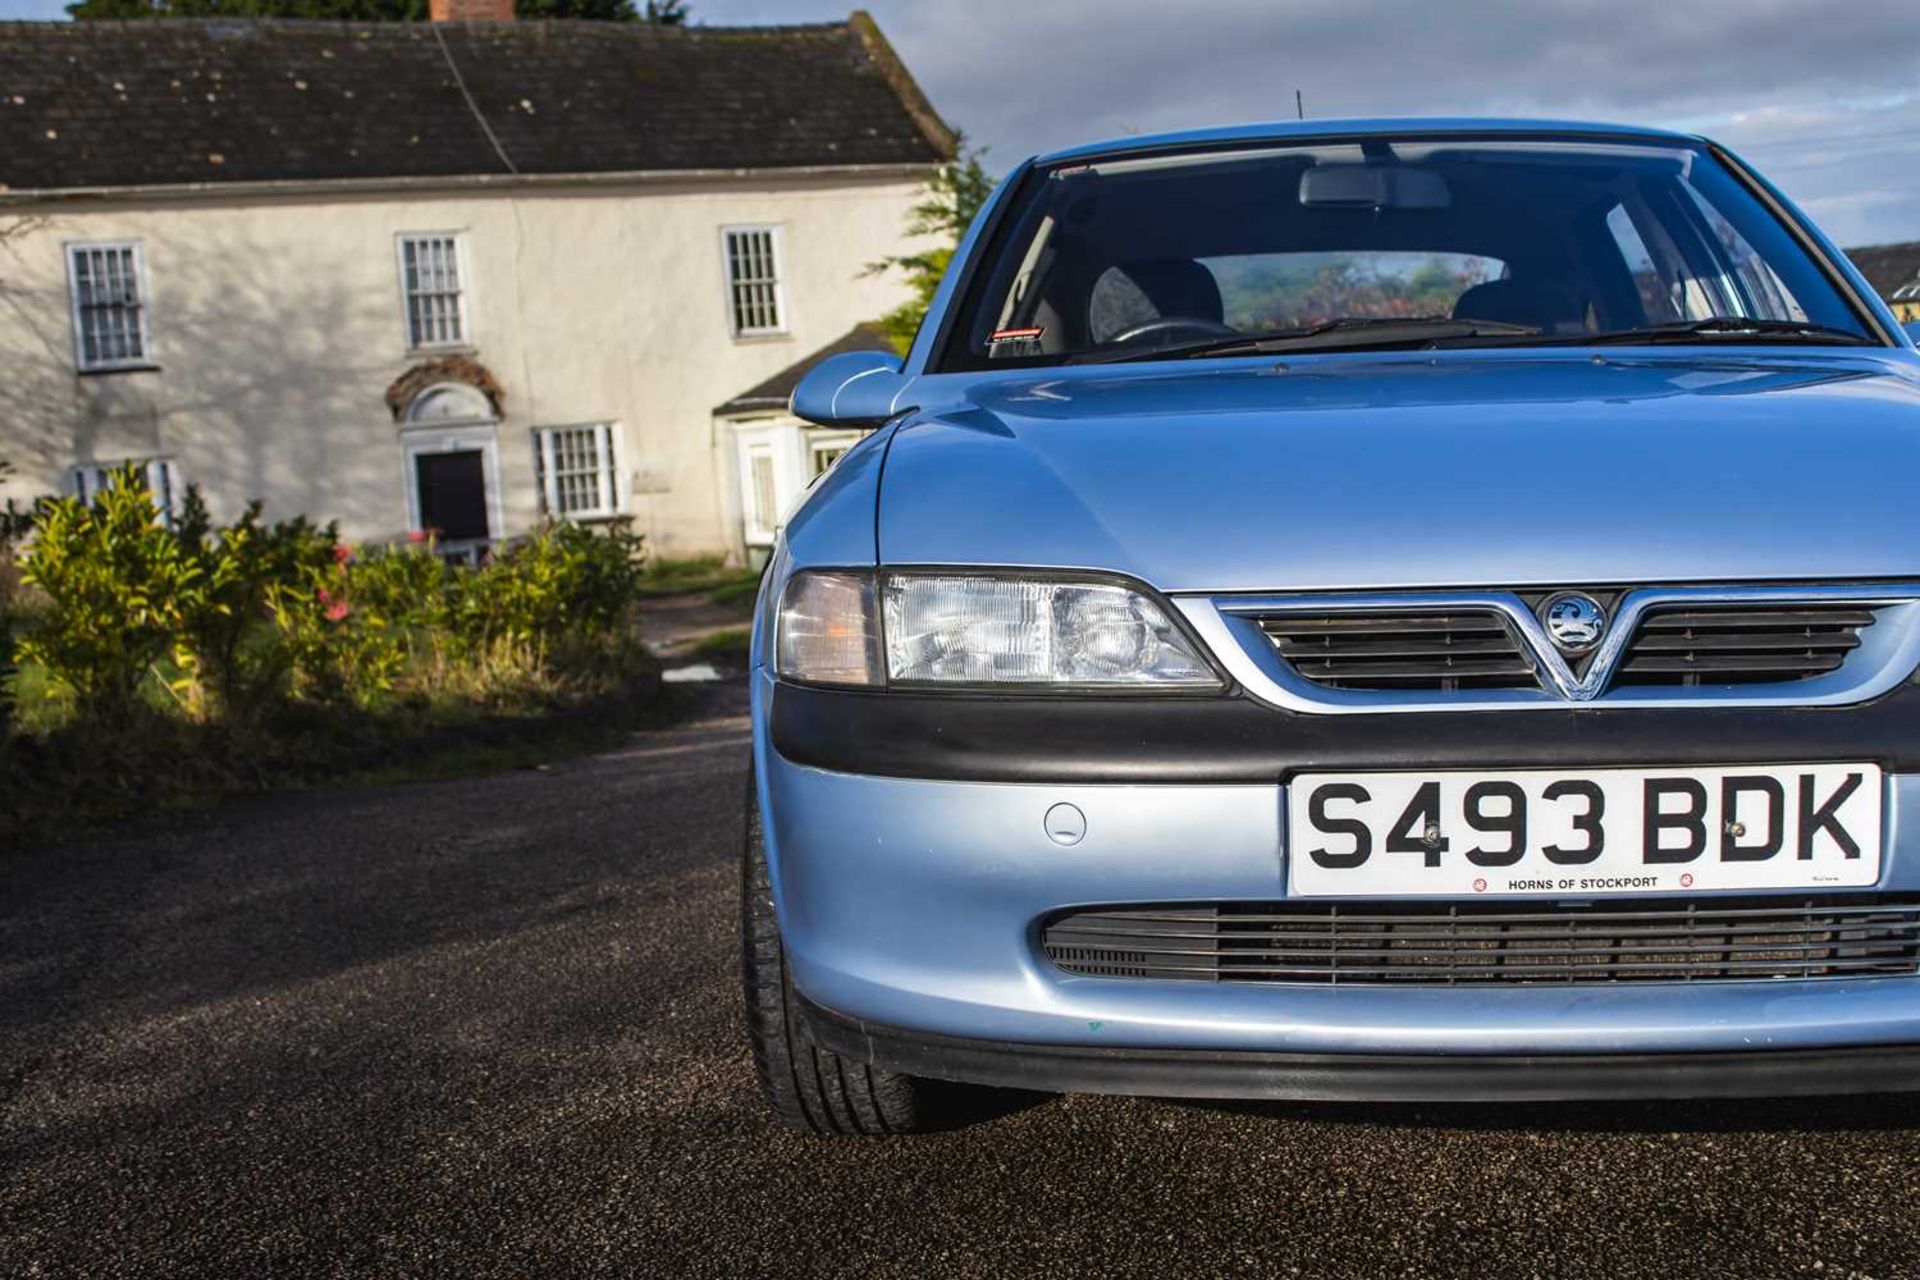 1998 Vauxhall Vectra 1.6 Envoy Automatic transmission and only 25,000 miles from new ***NO RESERVE** - Image 44 of 93